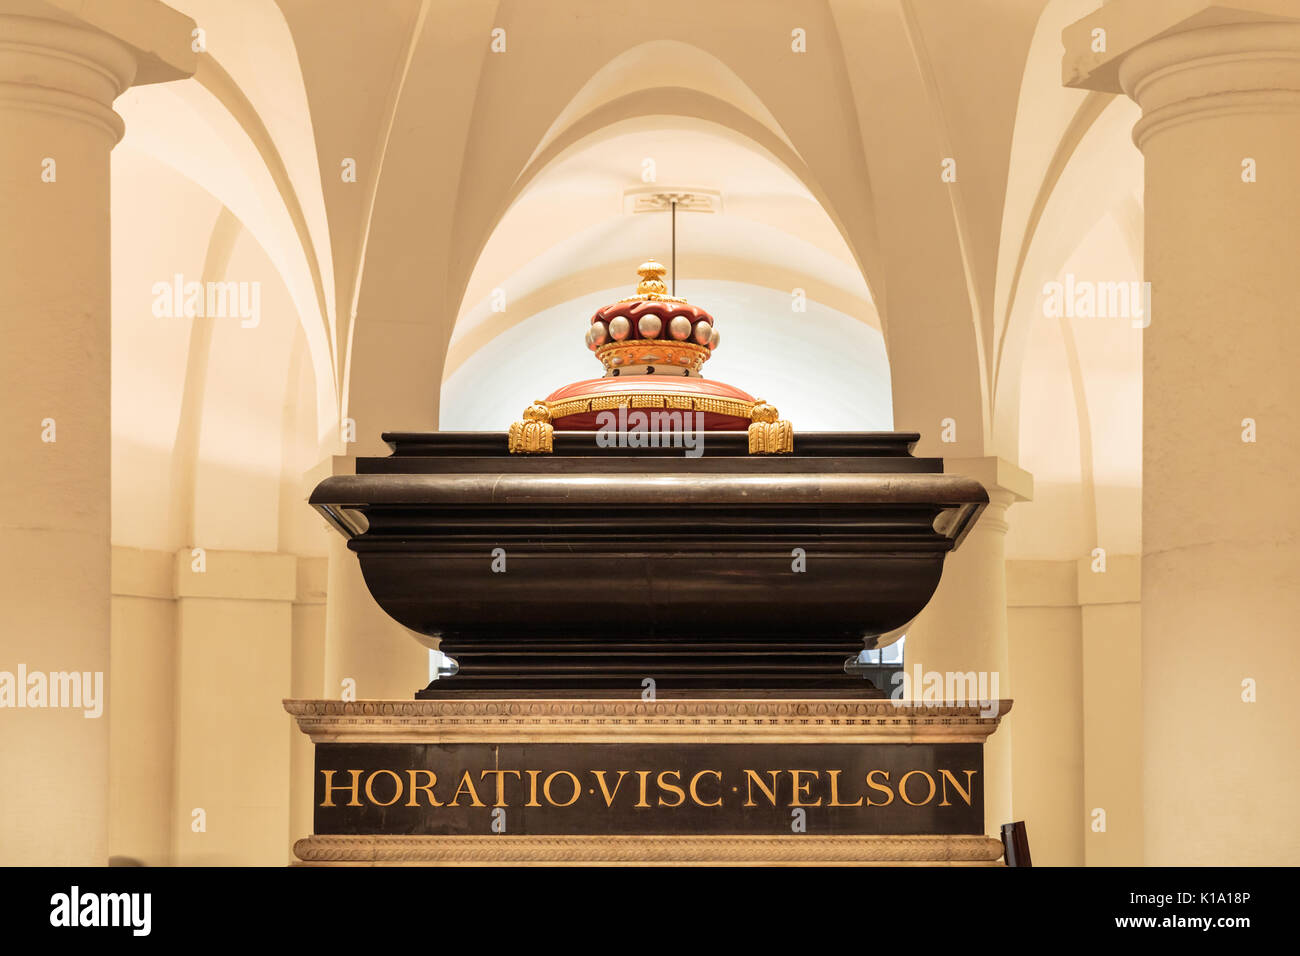 Lord Nelson's Tomb, black marble sarcophagus holding coffin of Admiral Lord Nelson, Horatio Viscount Nelson, Crypt of St Paul's Cathedral, London UK Stock Photo